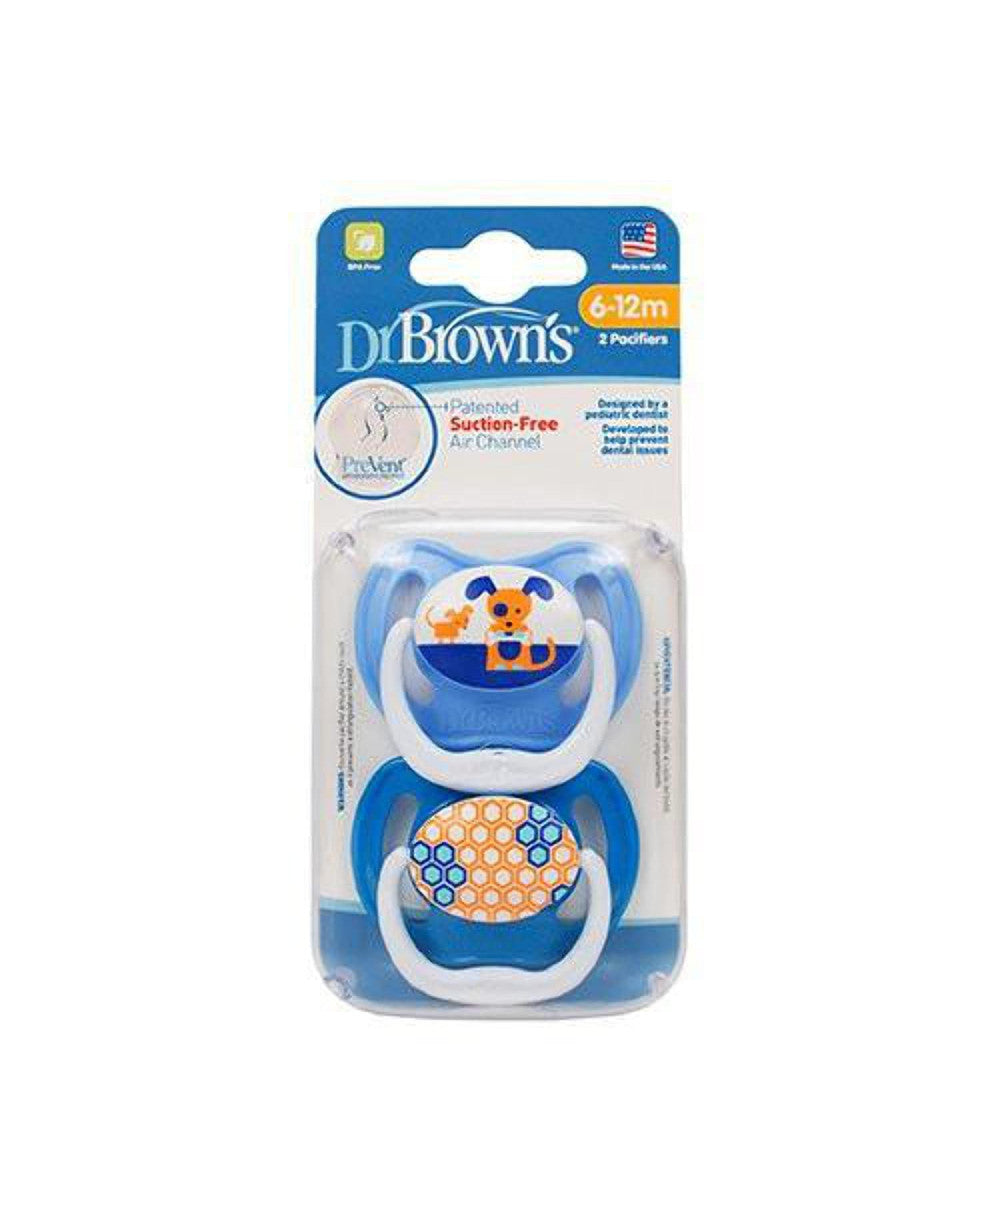 Dr Brown's PreVent Contoured Soother, 6-12 months